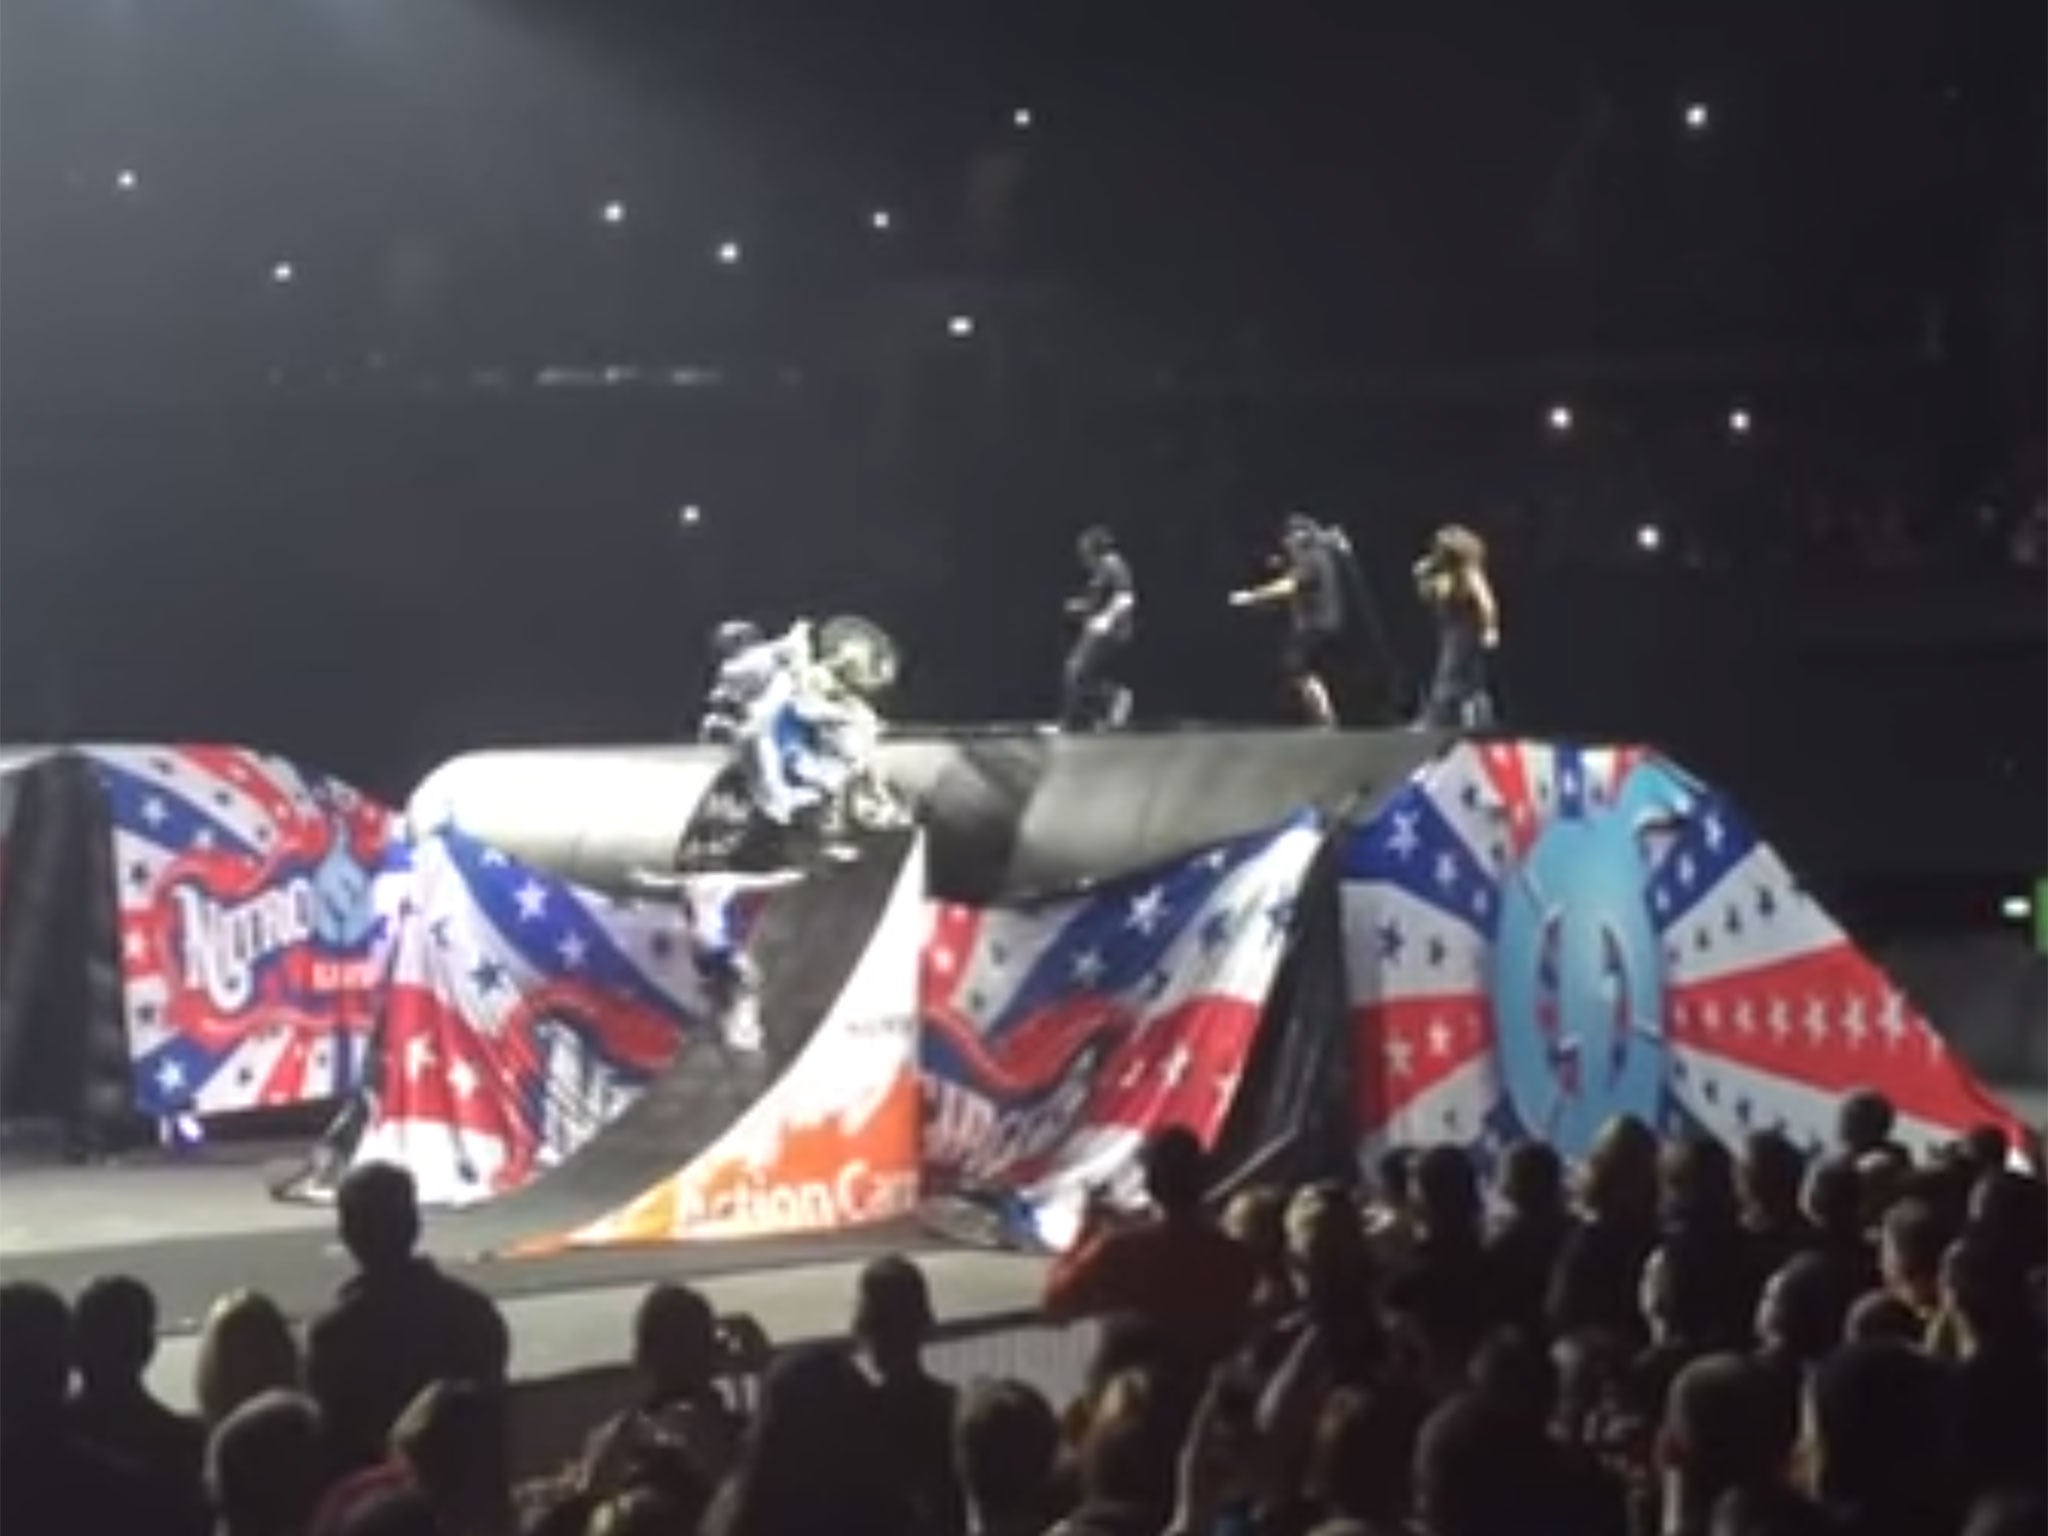 An audience member captures the moment a motorbike stunt goes wrong